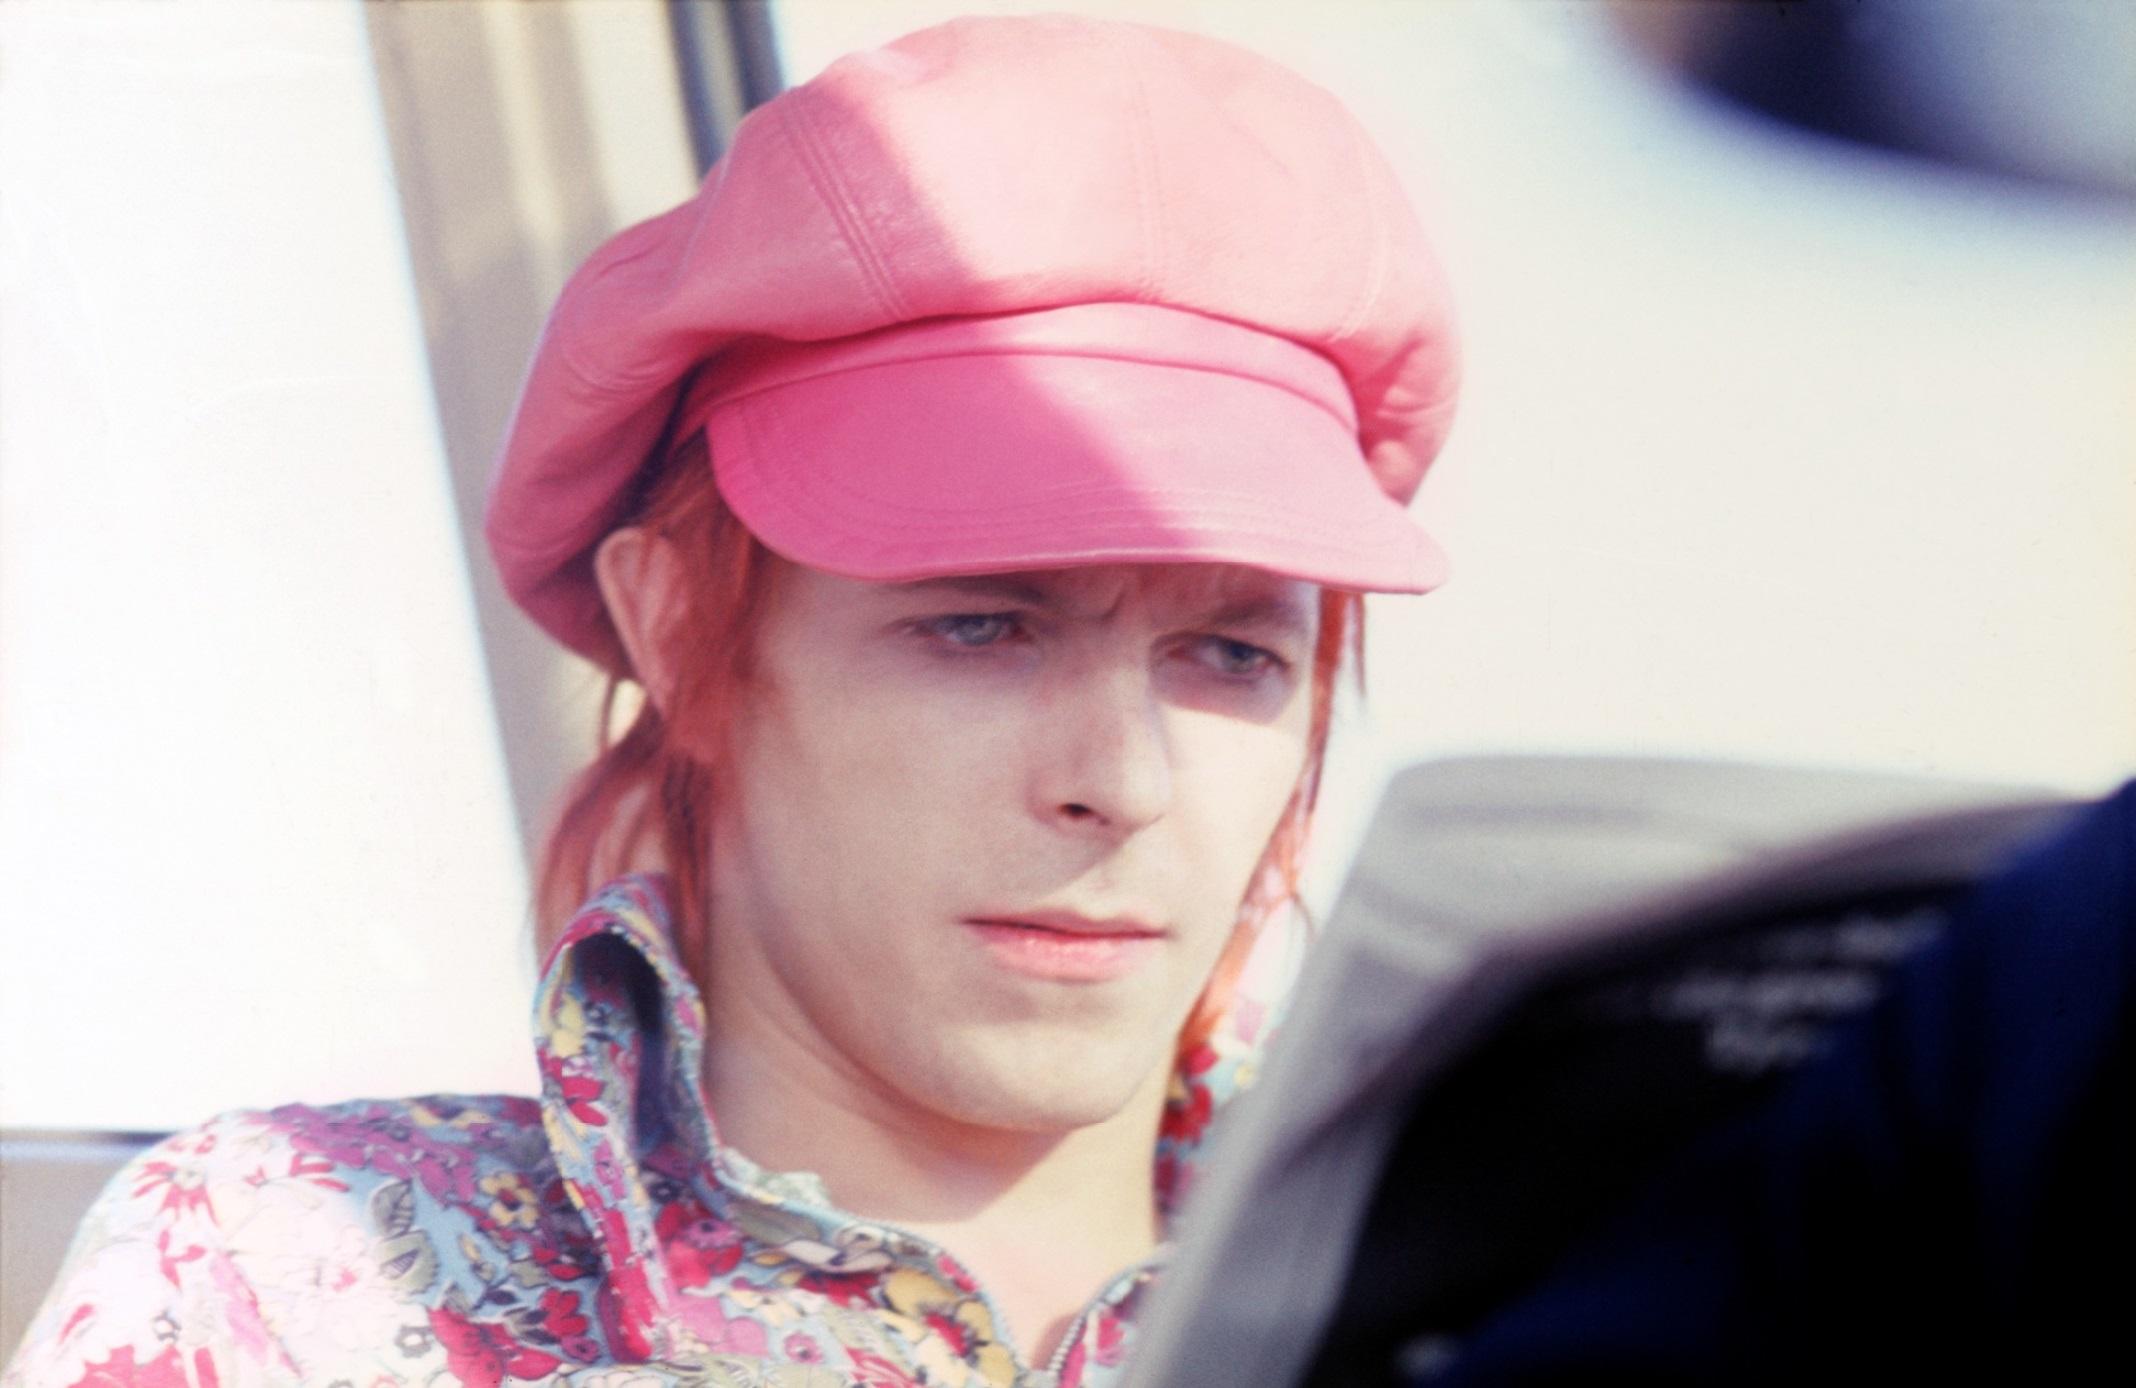 David Bowie - signed limited edition print 

David Bowie in pink hat, 1972. (photo Mick Rock)

paper size : 24x20 inches / 51 x 61 cm

Stamped and numbered by the Estate.

Archival pigment print.

edition of 50 only this size 

printed 2022 

OTHER